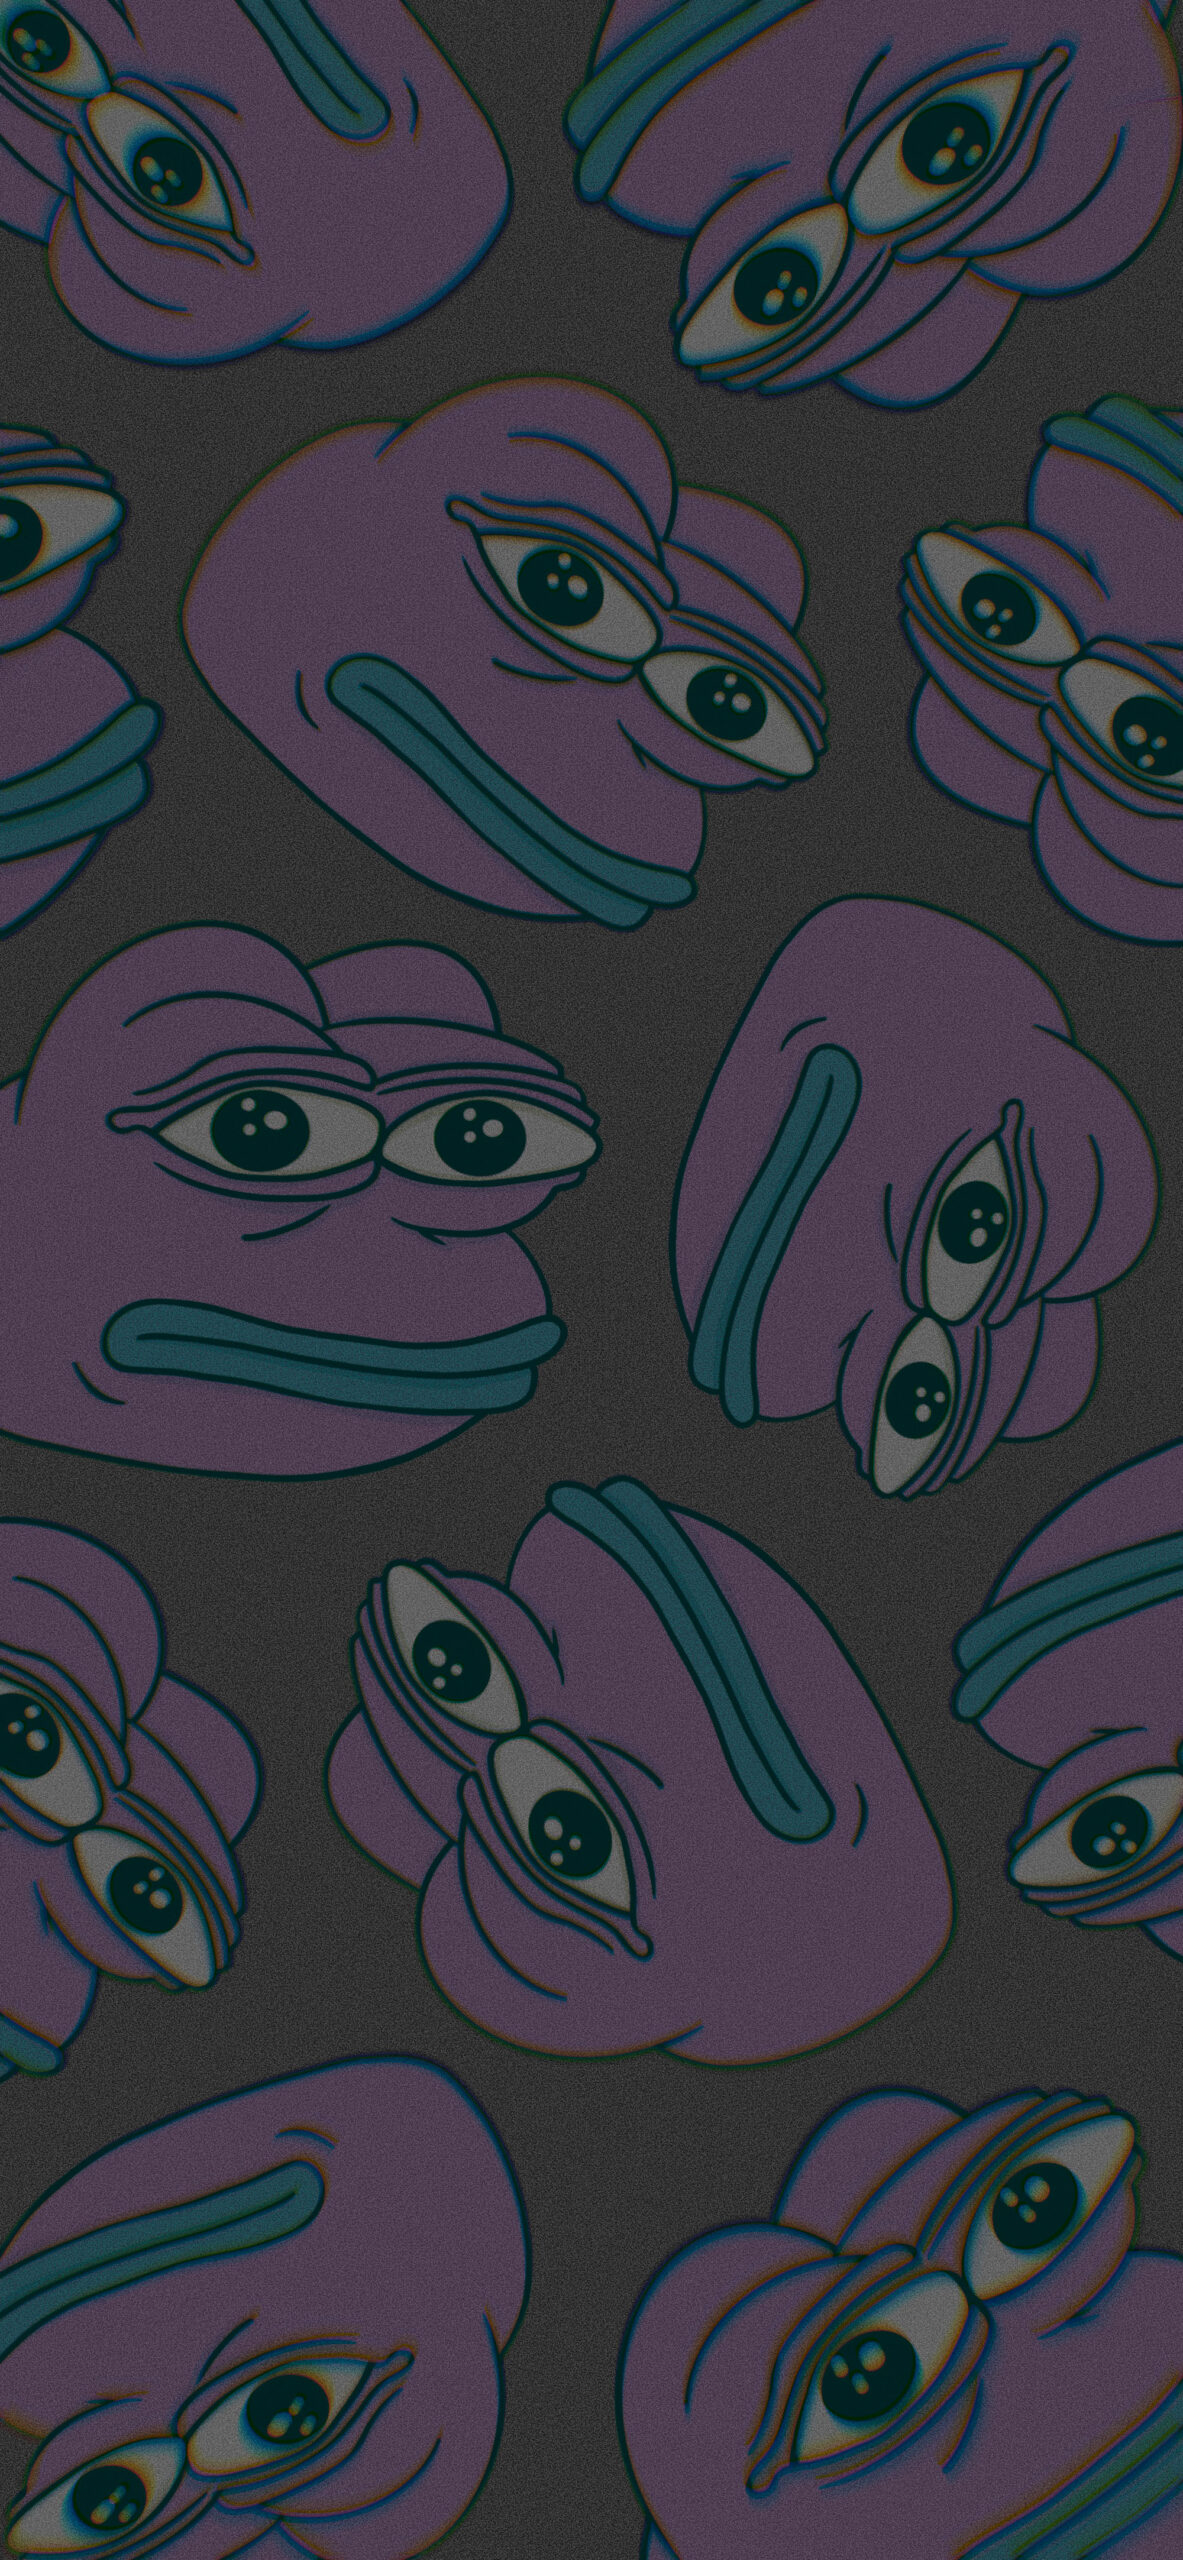 Pepe Iphone Wallpapers